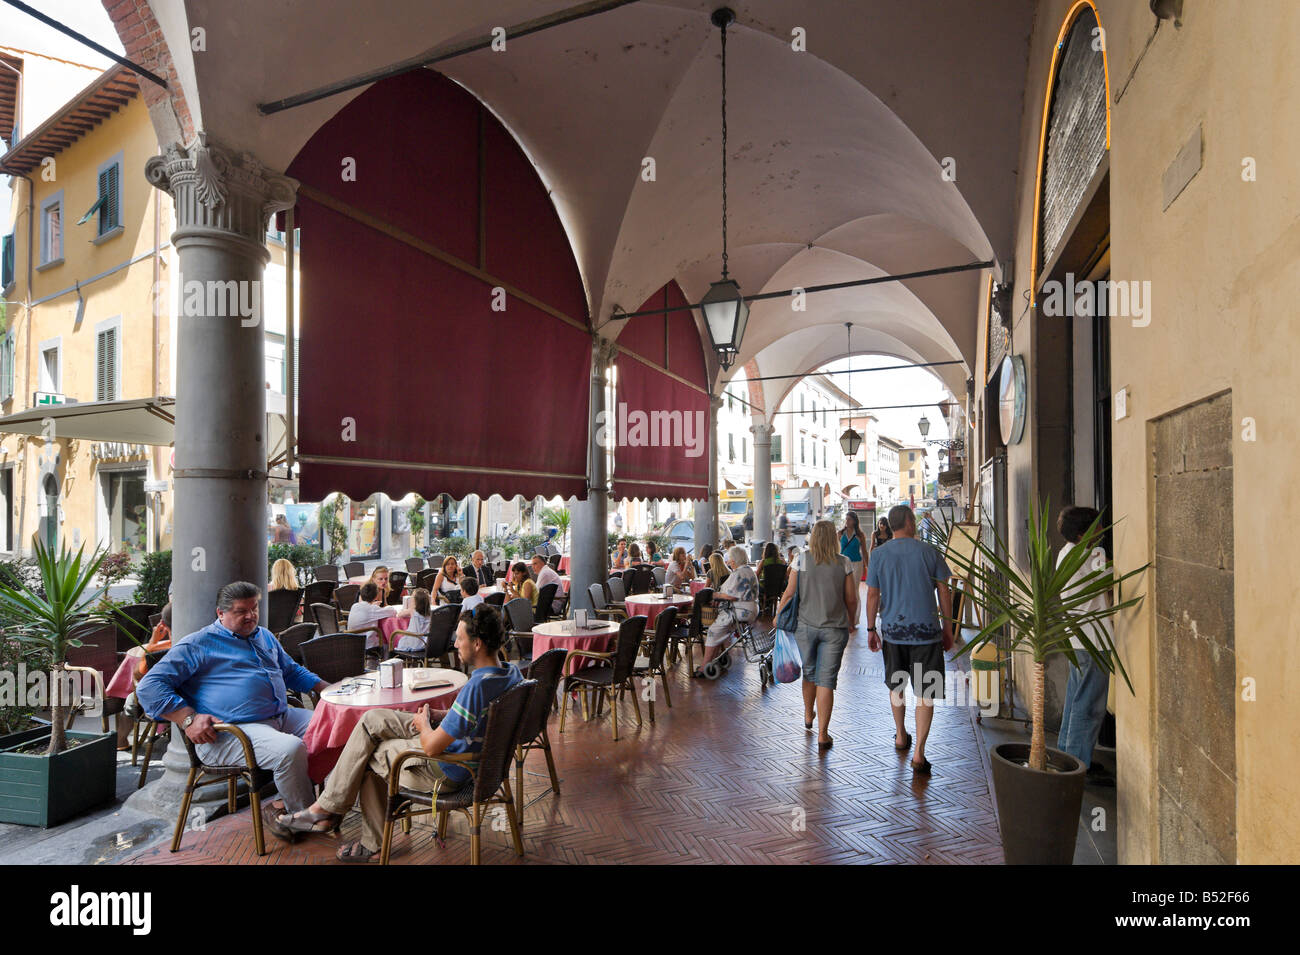 Cafe and shops in an arcade in the old town, Borgo Stretto, Pisa,Tuscany, Italy Stock Photo